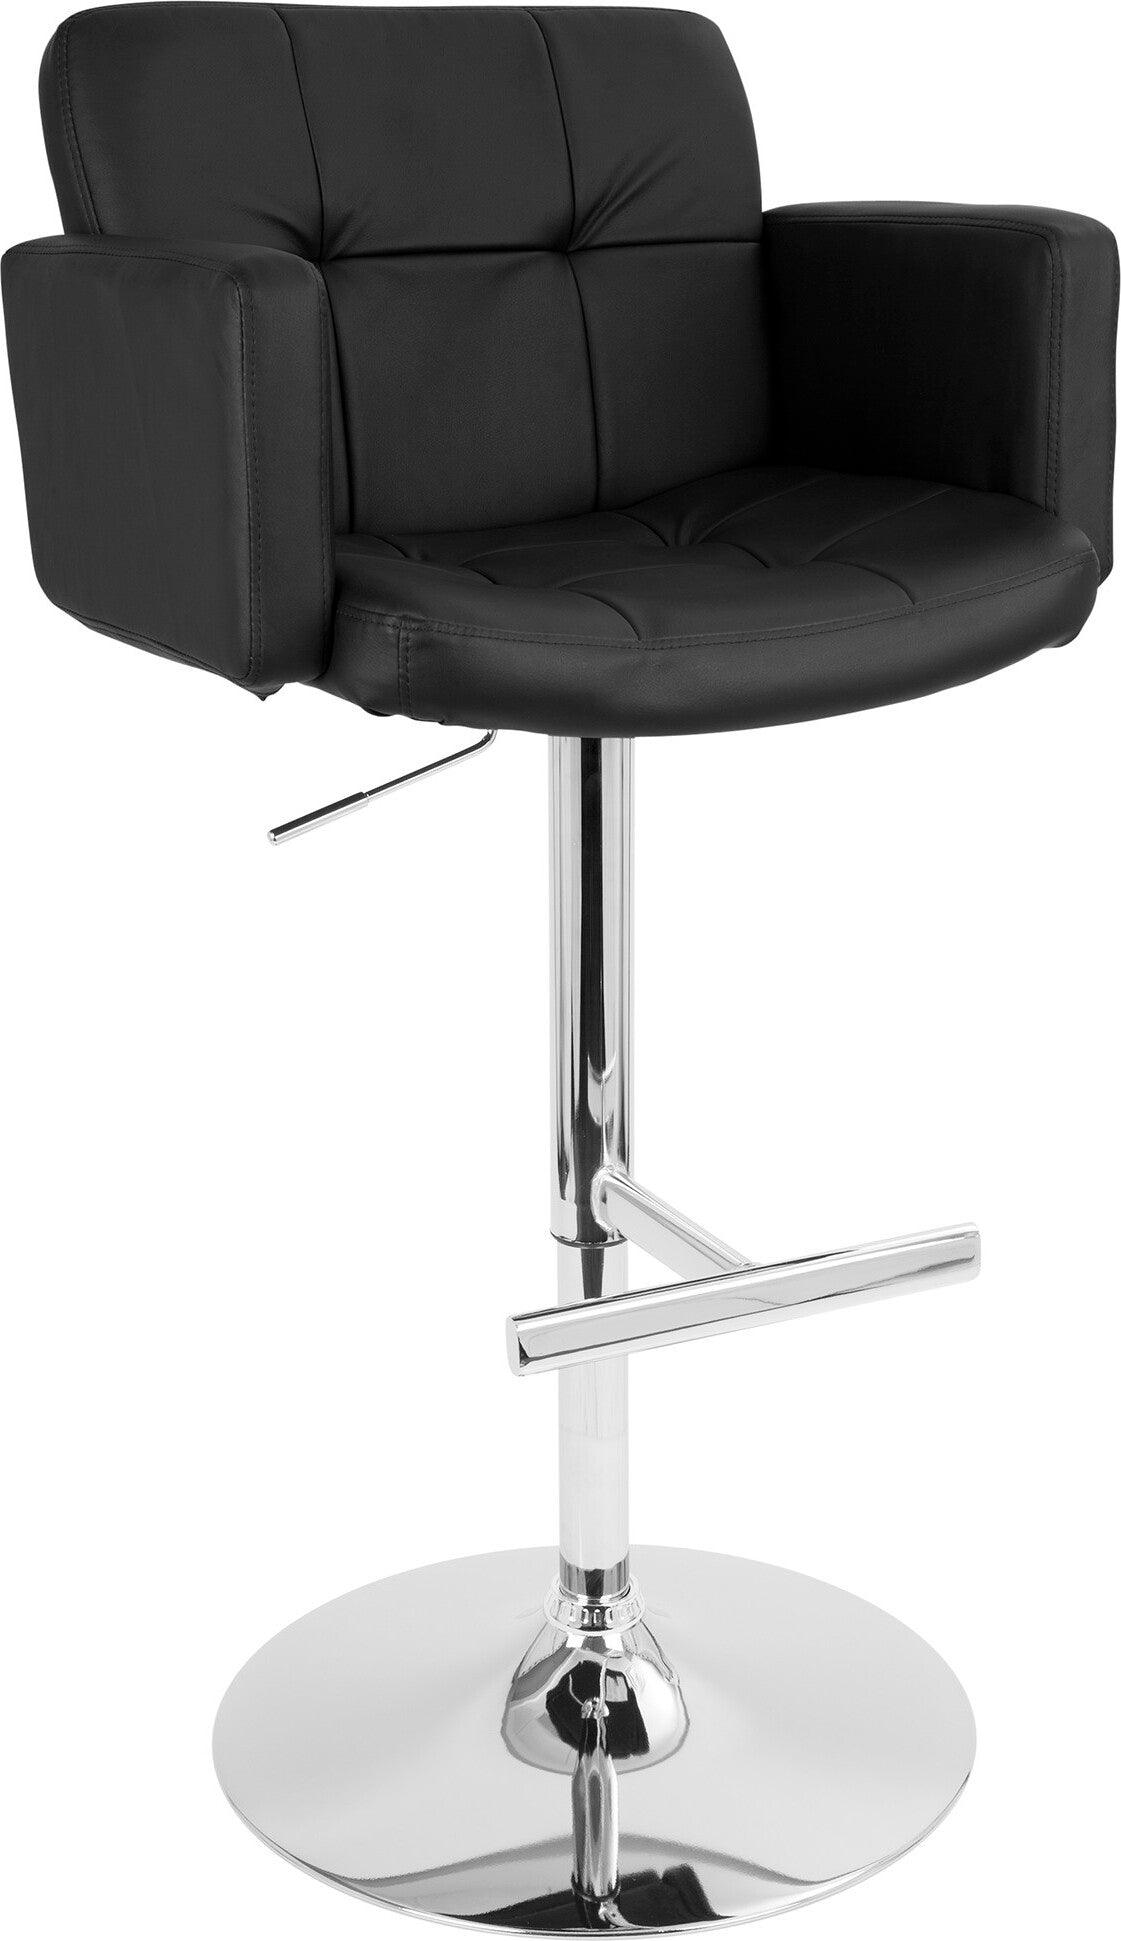 Lumisource Barstools - Stout Contemporary Adjustable Barstool with Swivel and Black Faux Leather